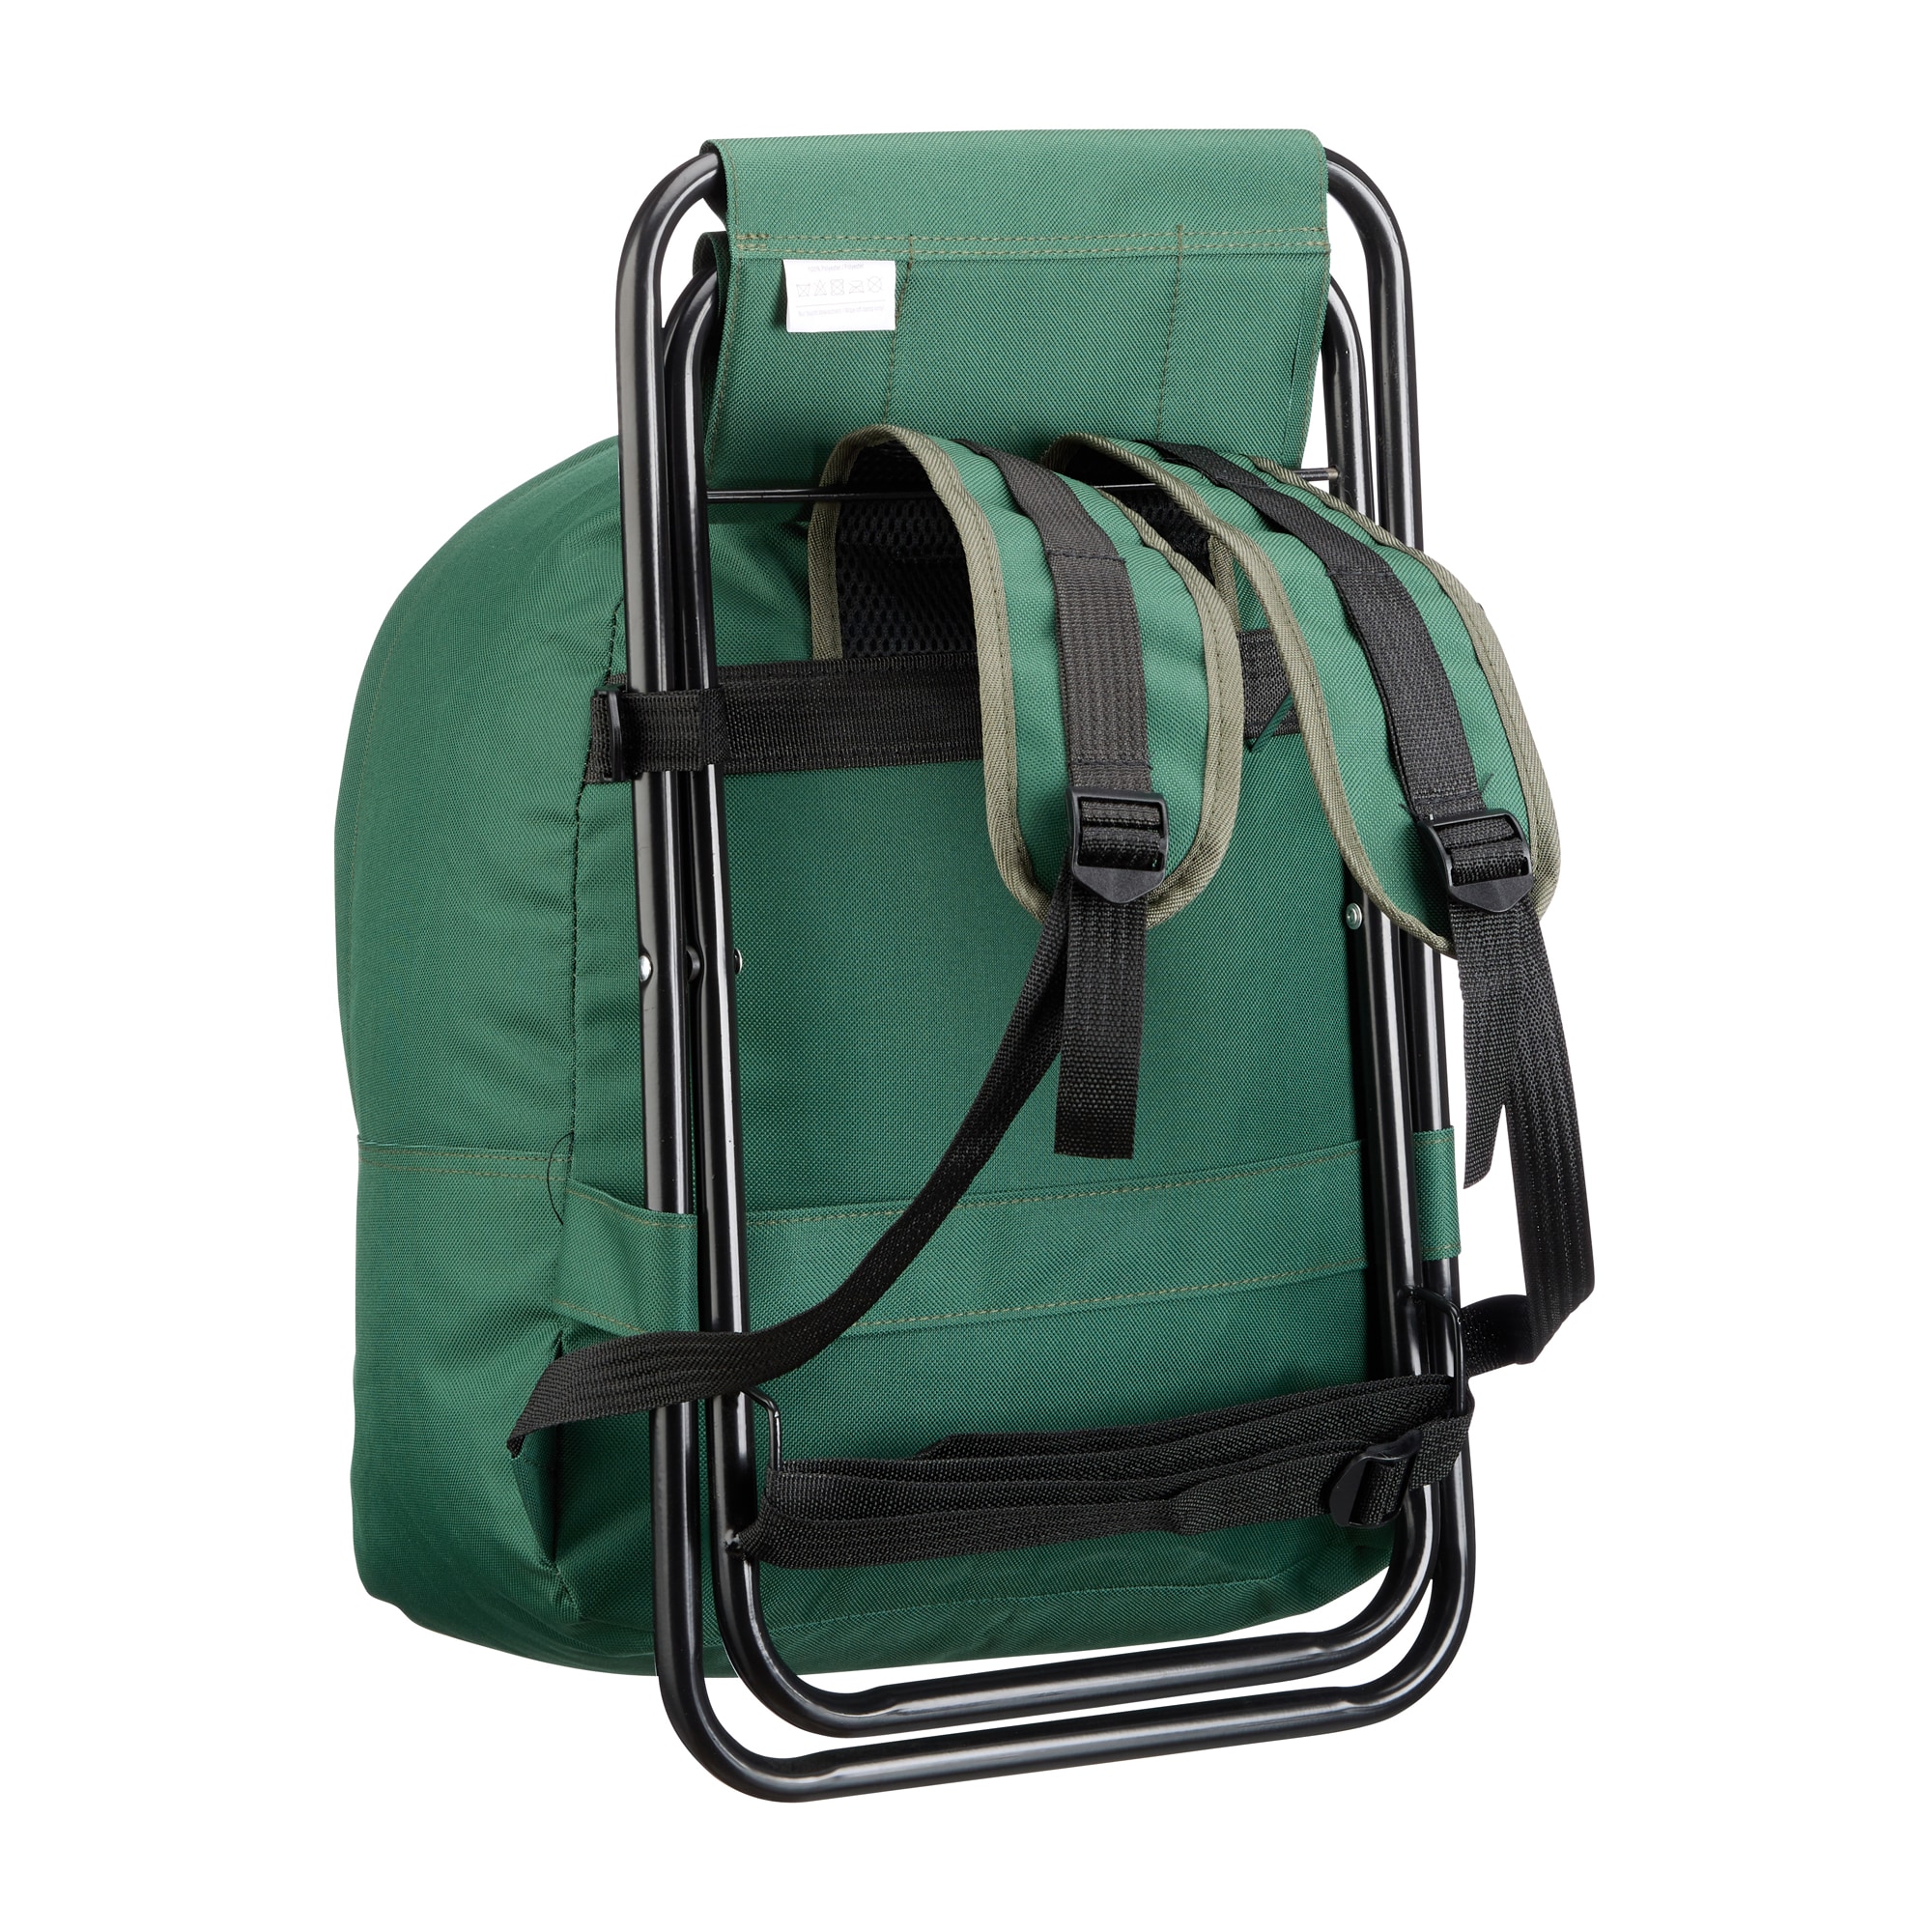 Purchase the HI Fishing Stool Backpack by ASMC